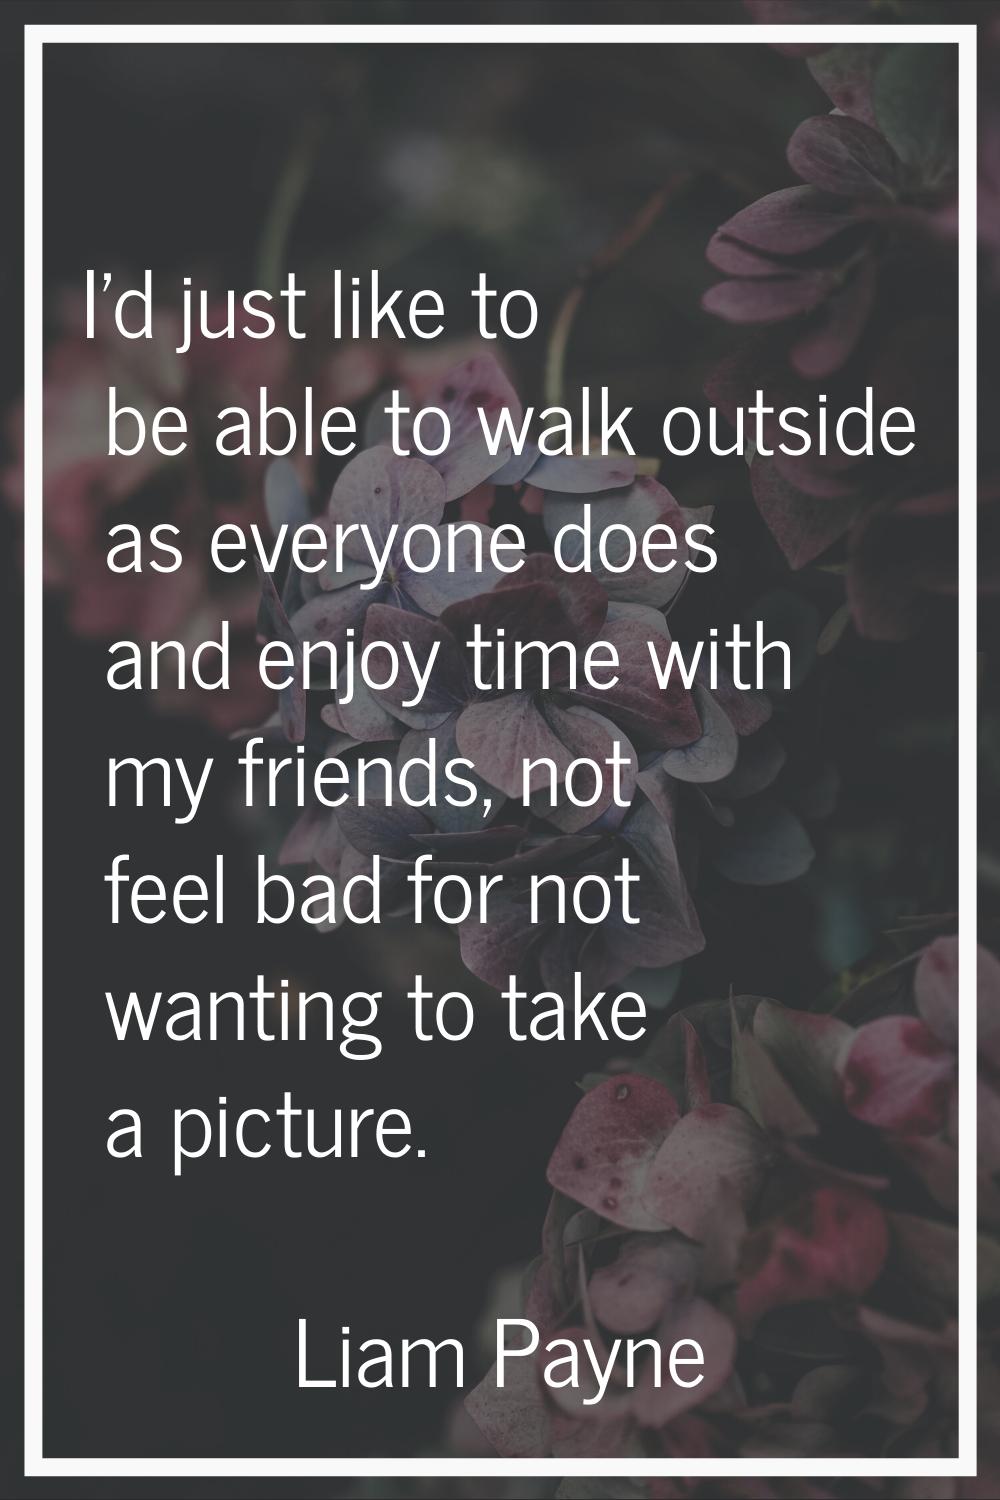 I'd just like to be able to walk outside as everyone does and enjoy time with my friends, not feel 